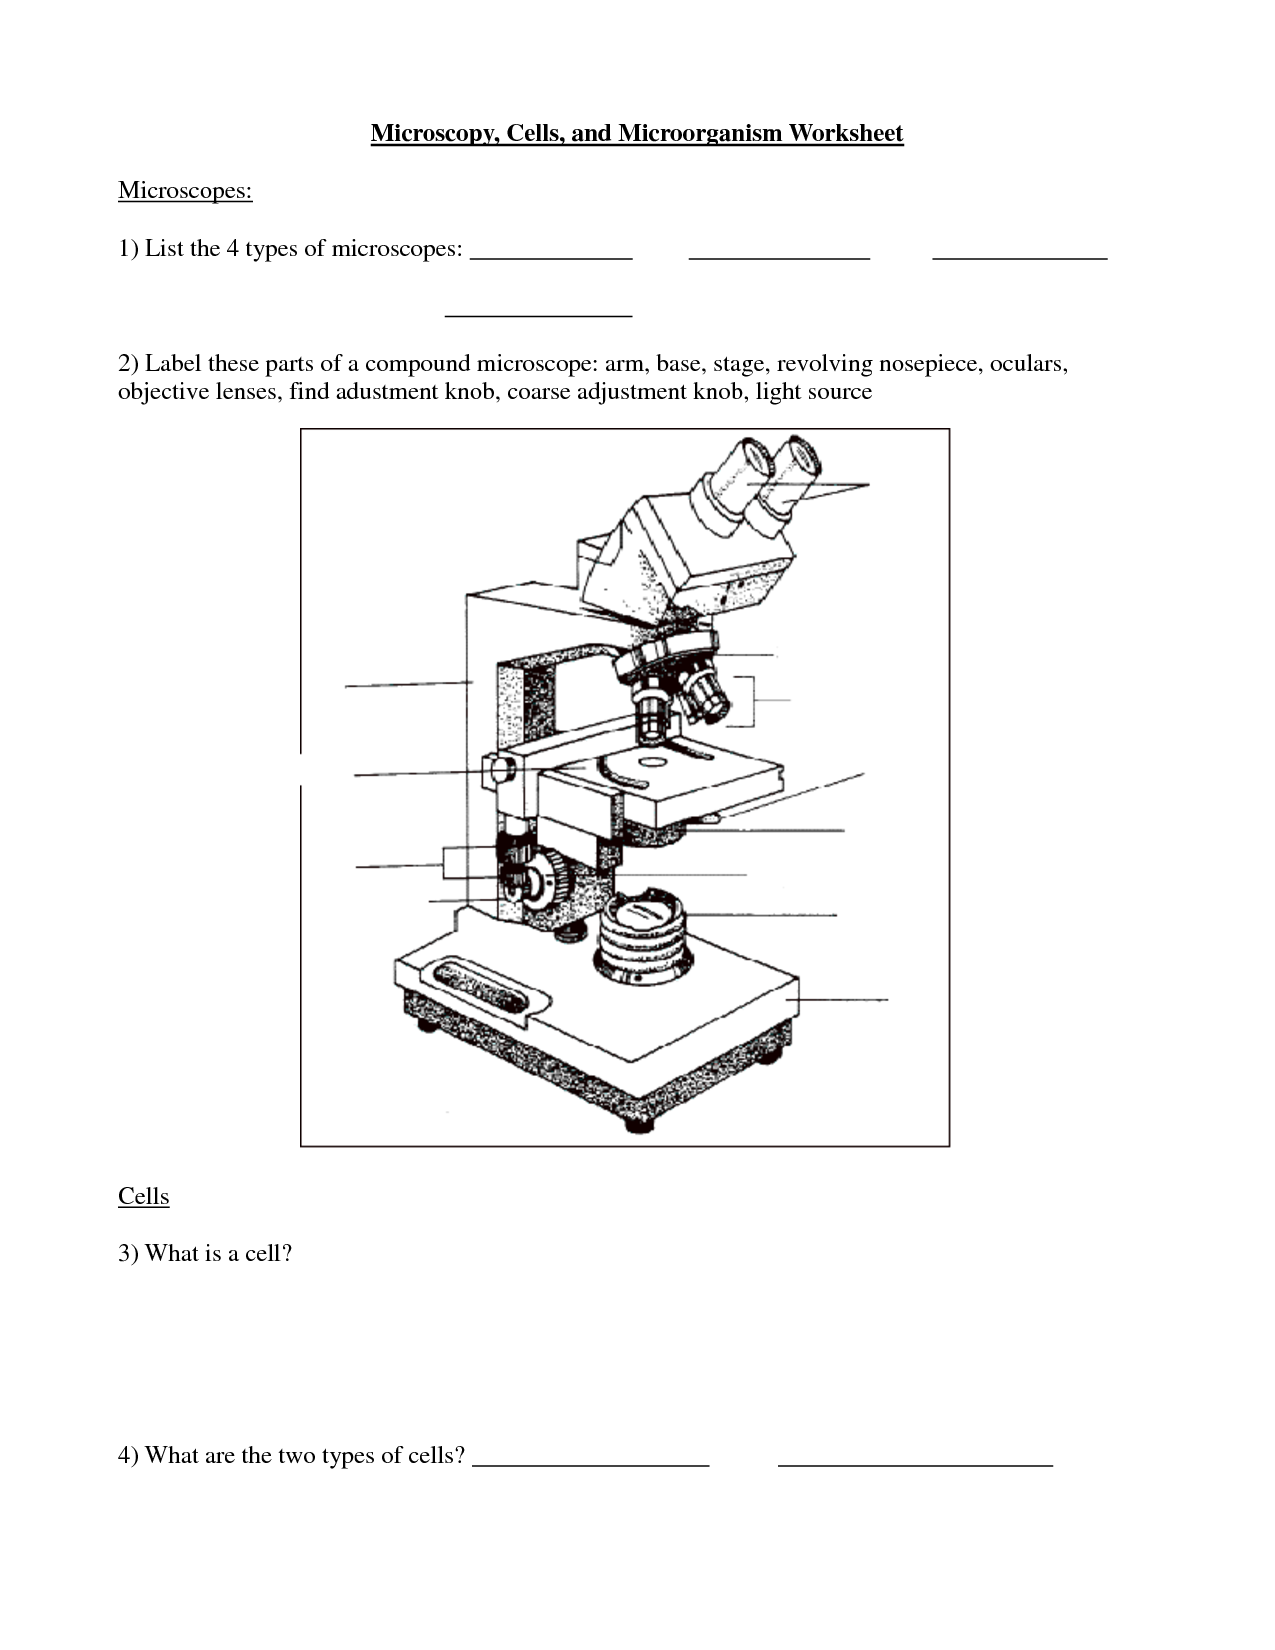 Cells and Microscope Worksheet Image